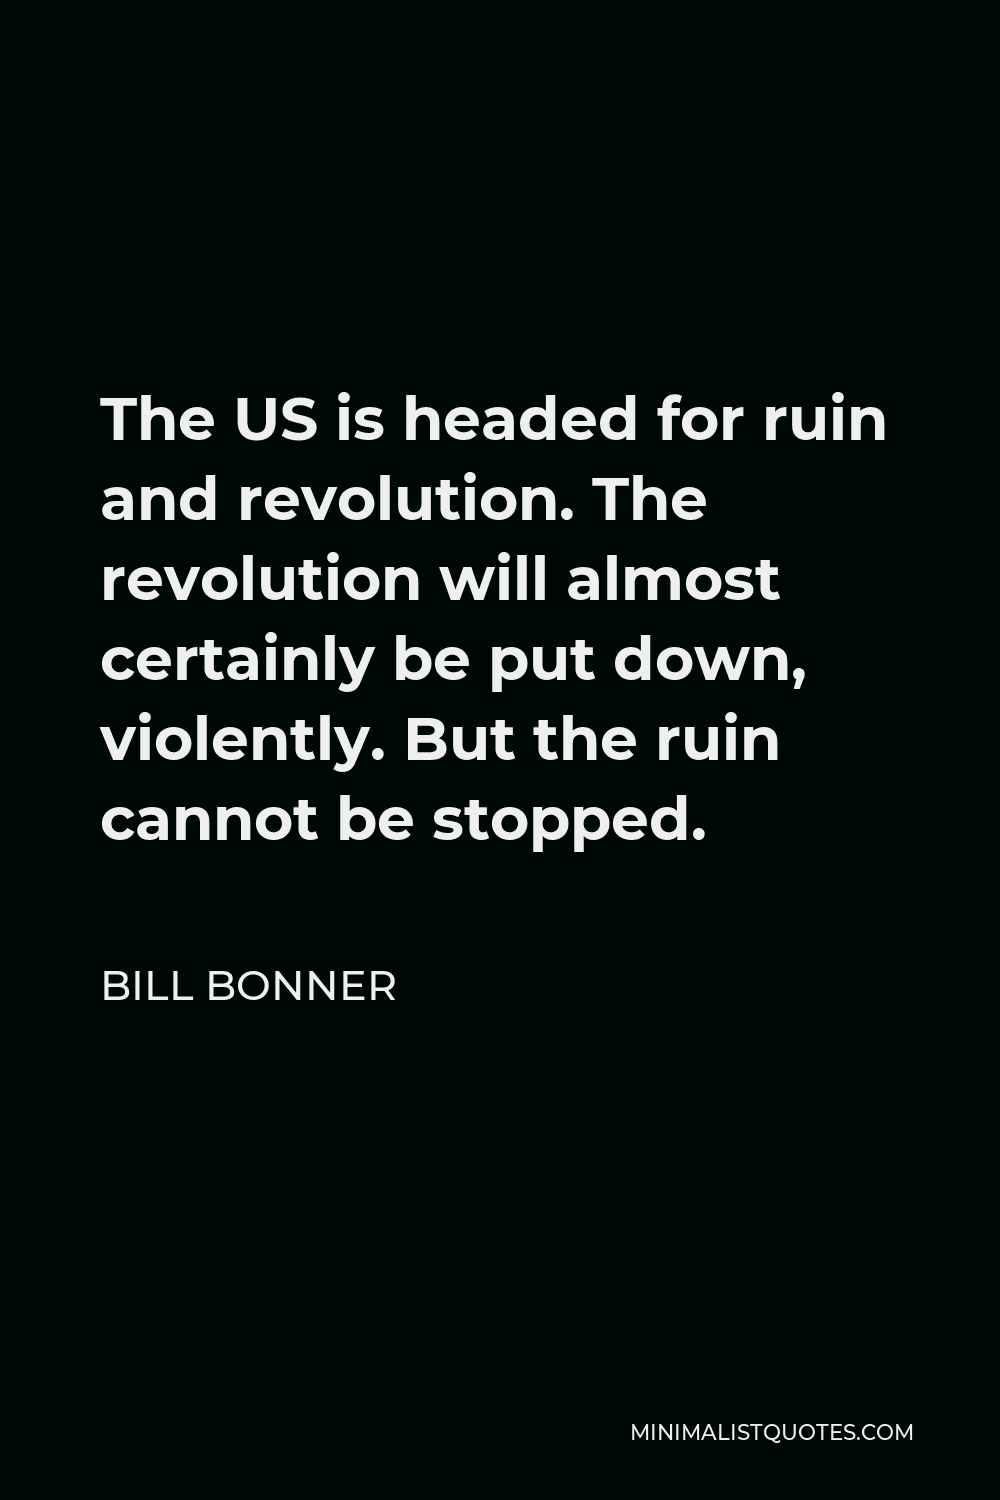 Bill Bonner Quote - The US is headed for ruin and revolution. The revolution will almost certainly be put down, violently. But the ruin cannot be stopped.